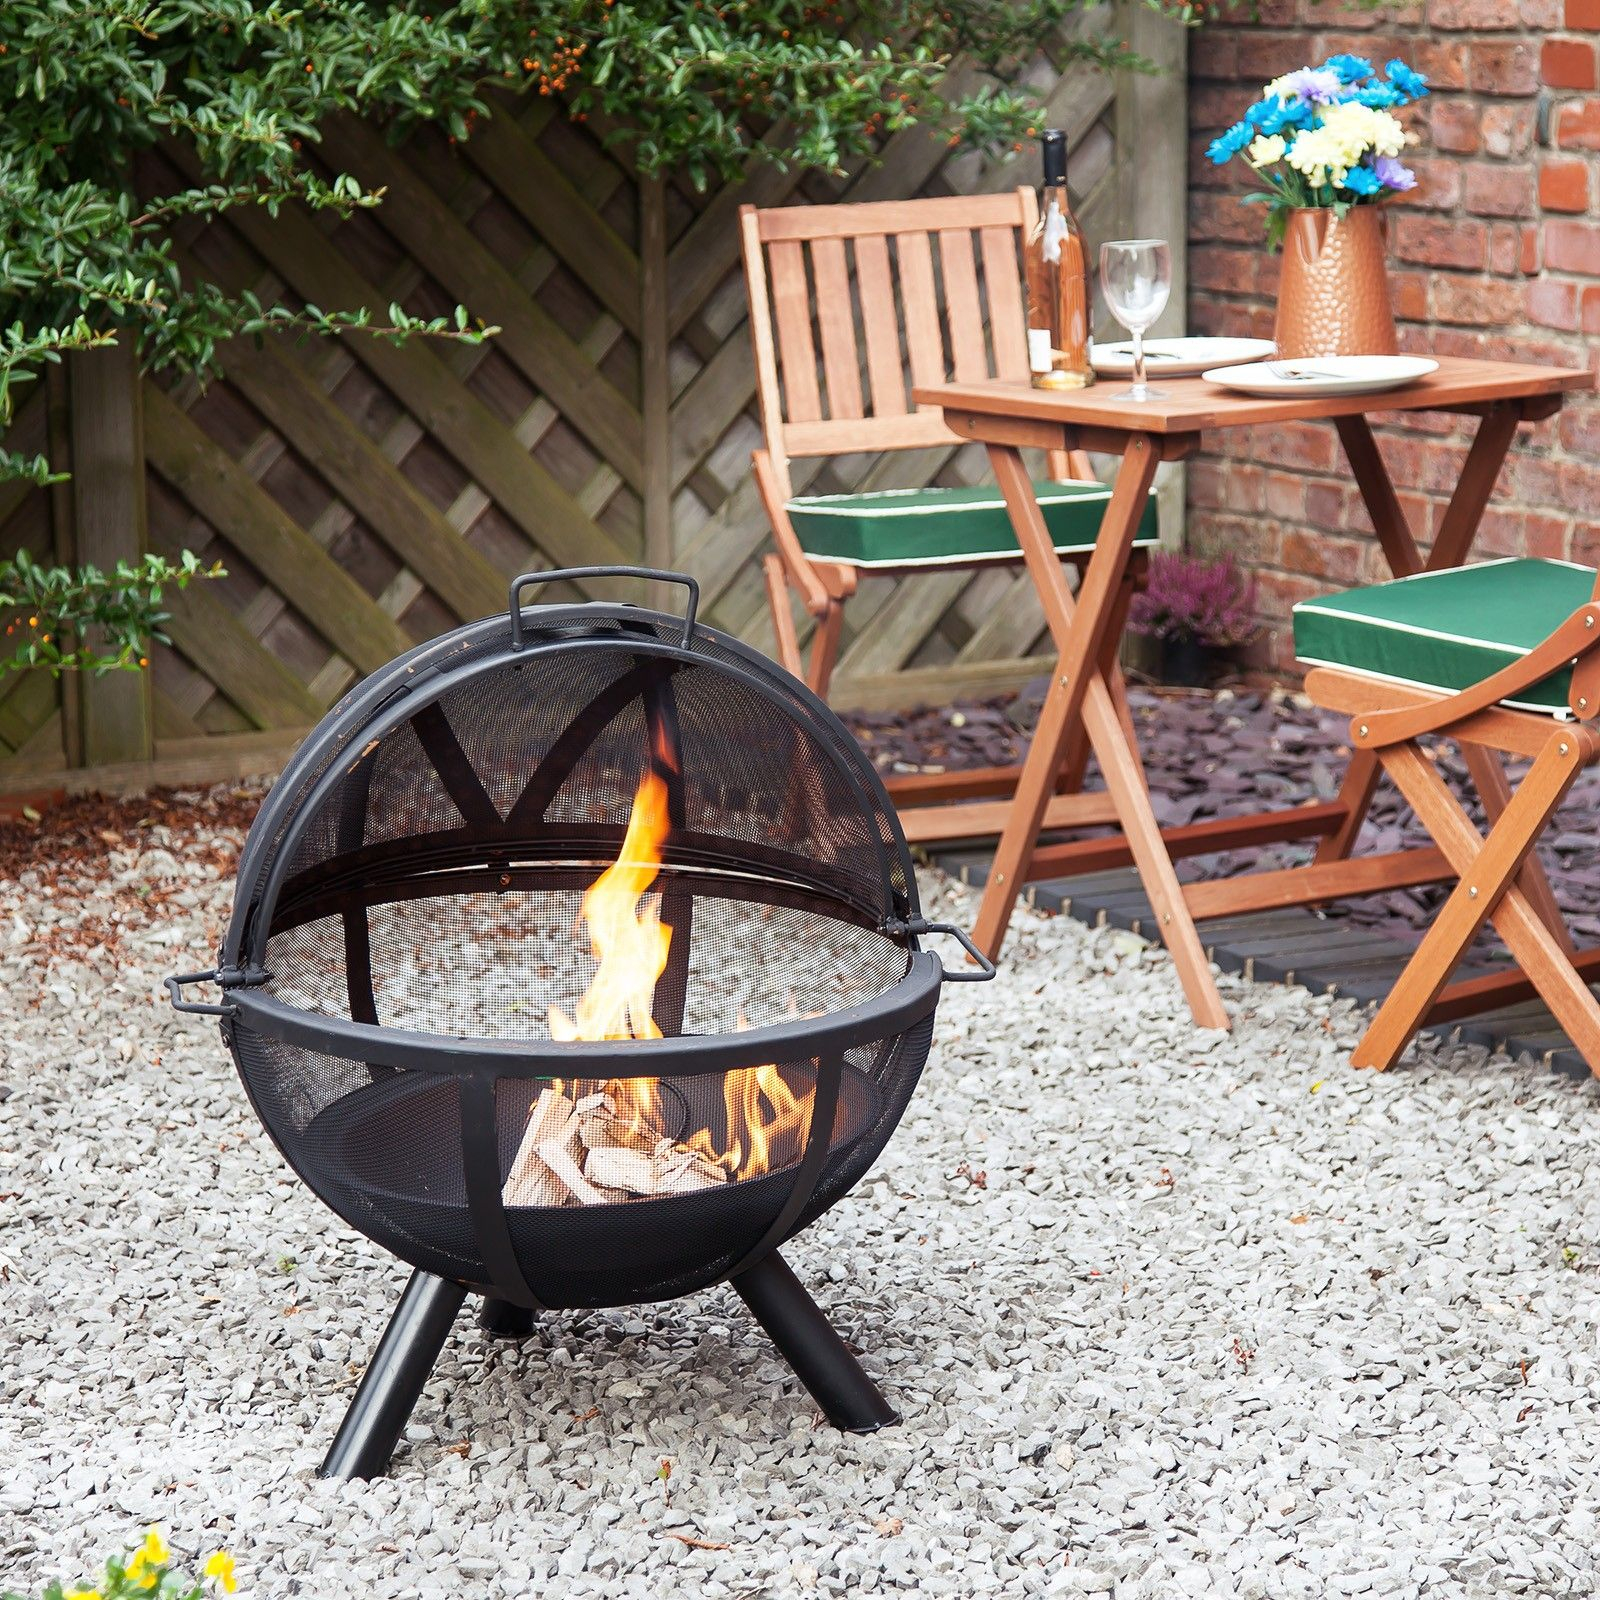 Aruba 24 Steel Mesh Fire Pit With Barbecue Grill Garden Fire in dimensions 1600 X 1600